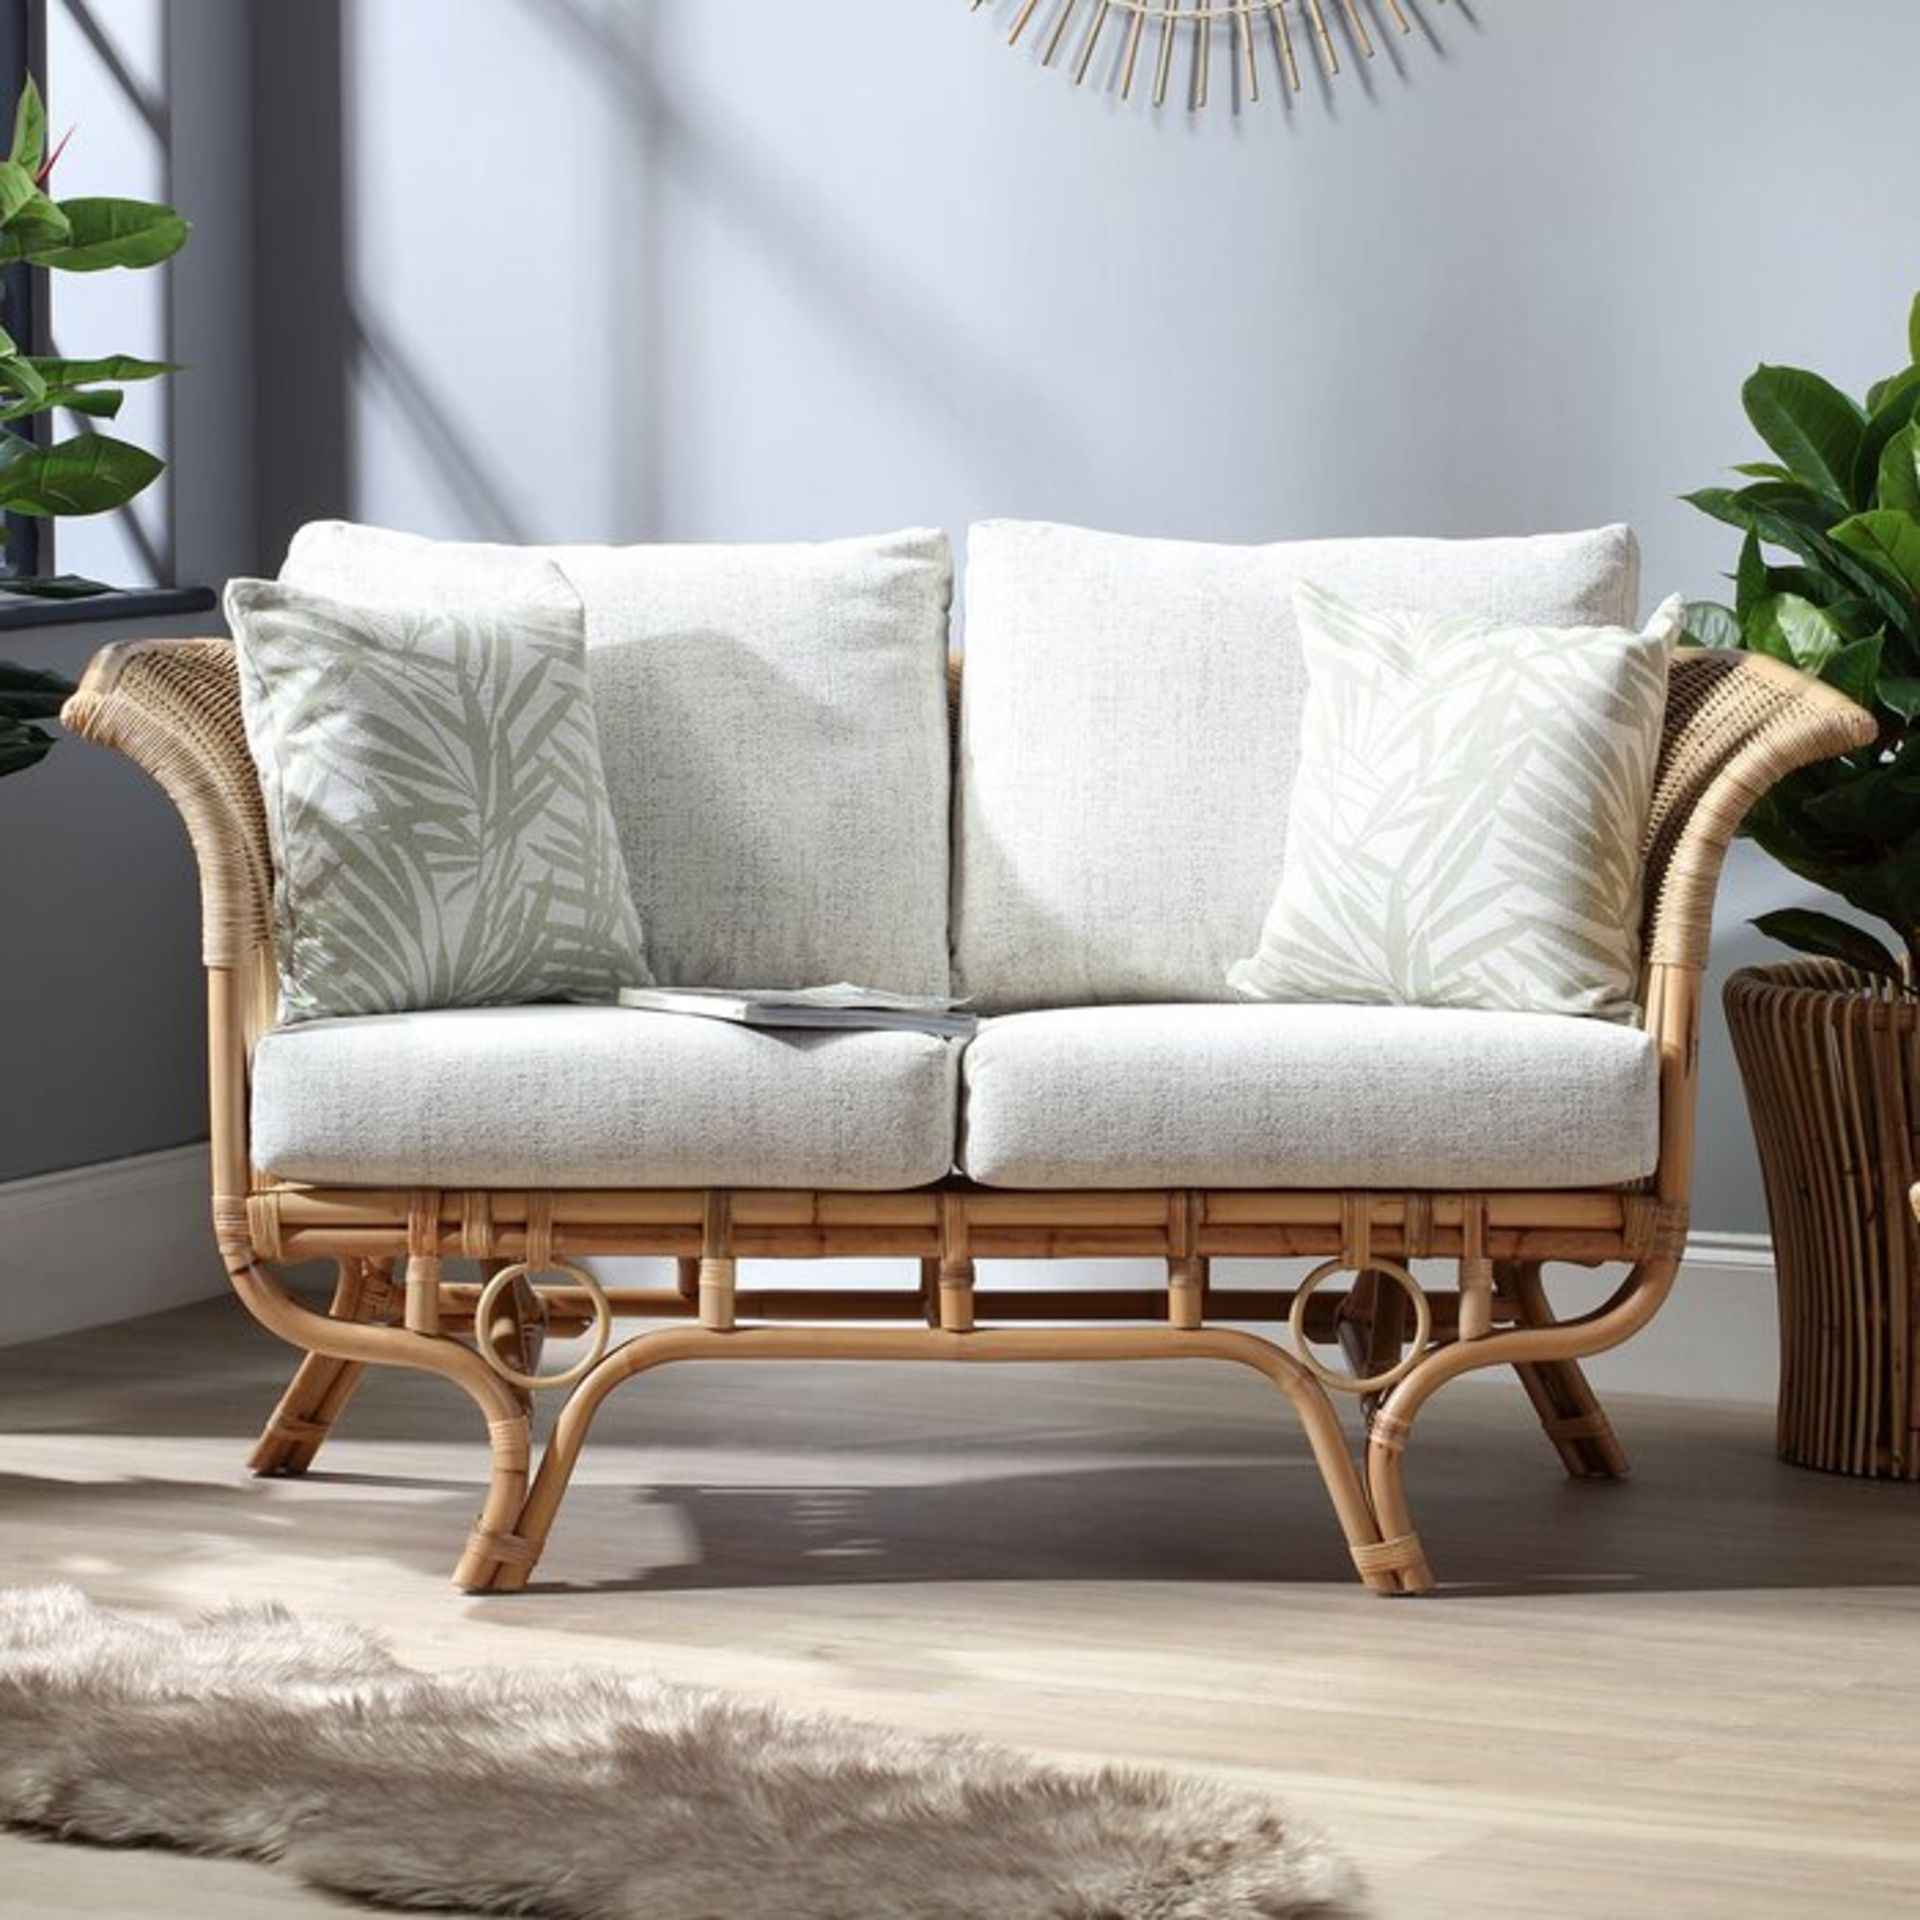 Cartersville 2 Seater Conservatory Sofa - RRP £779.99 - Image 2 of 2